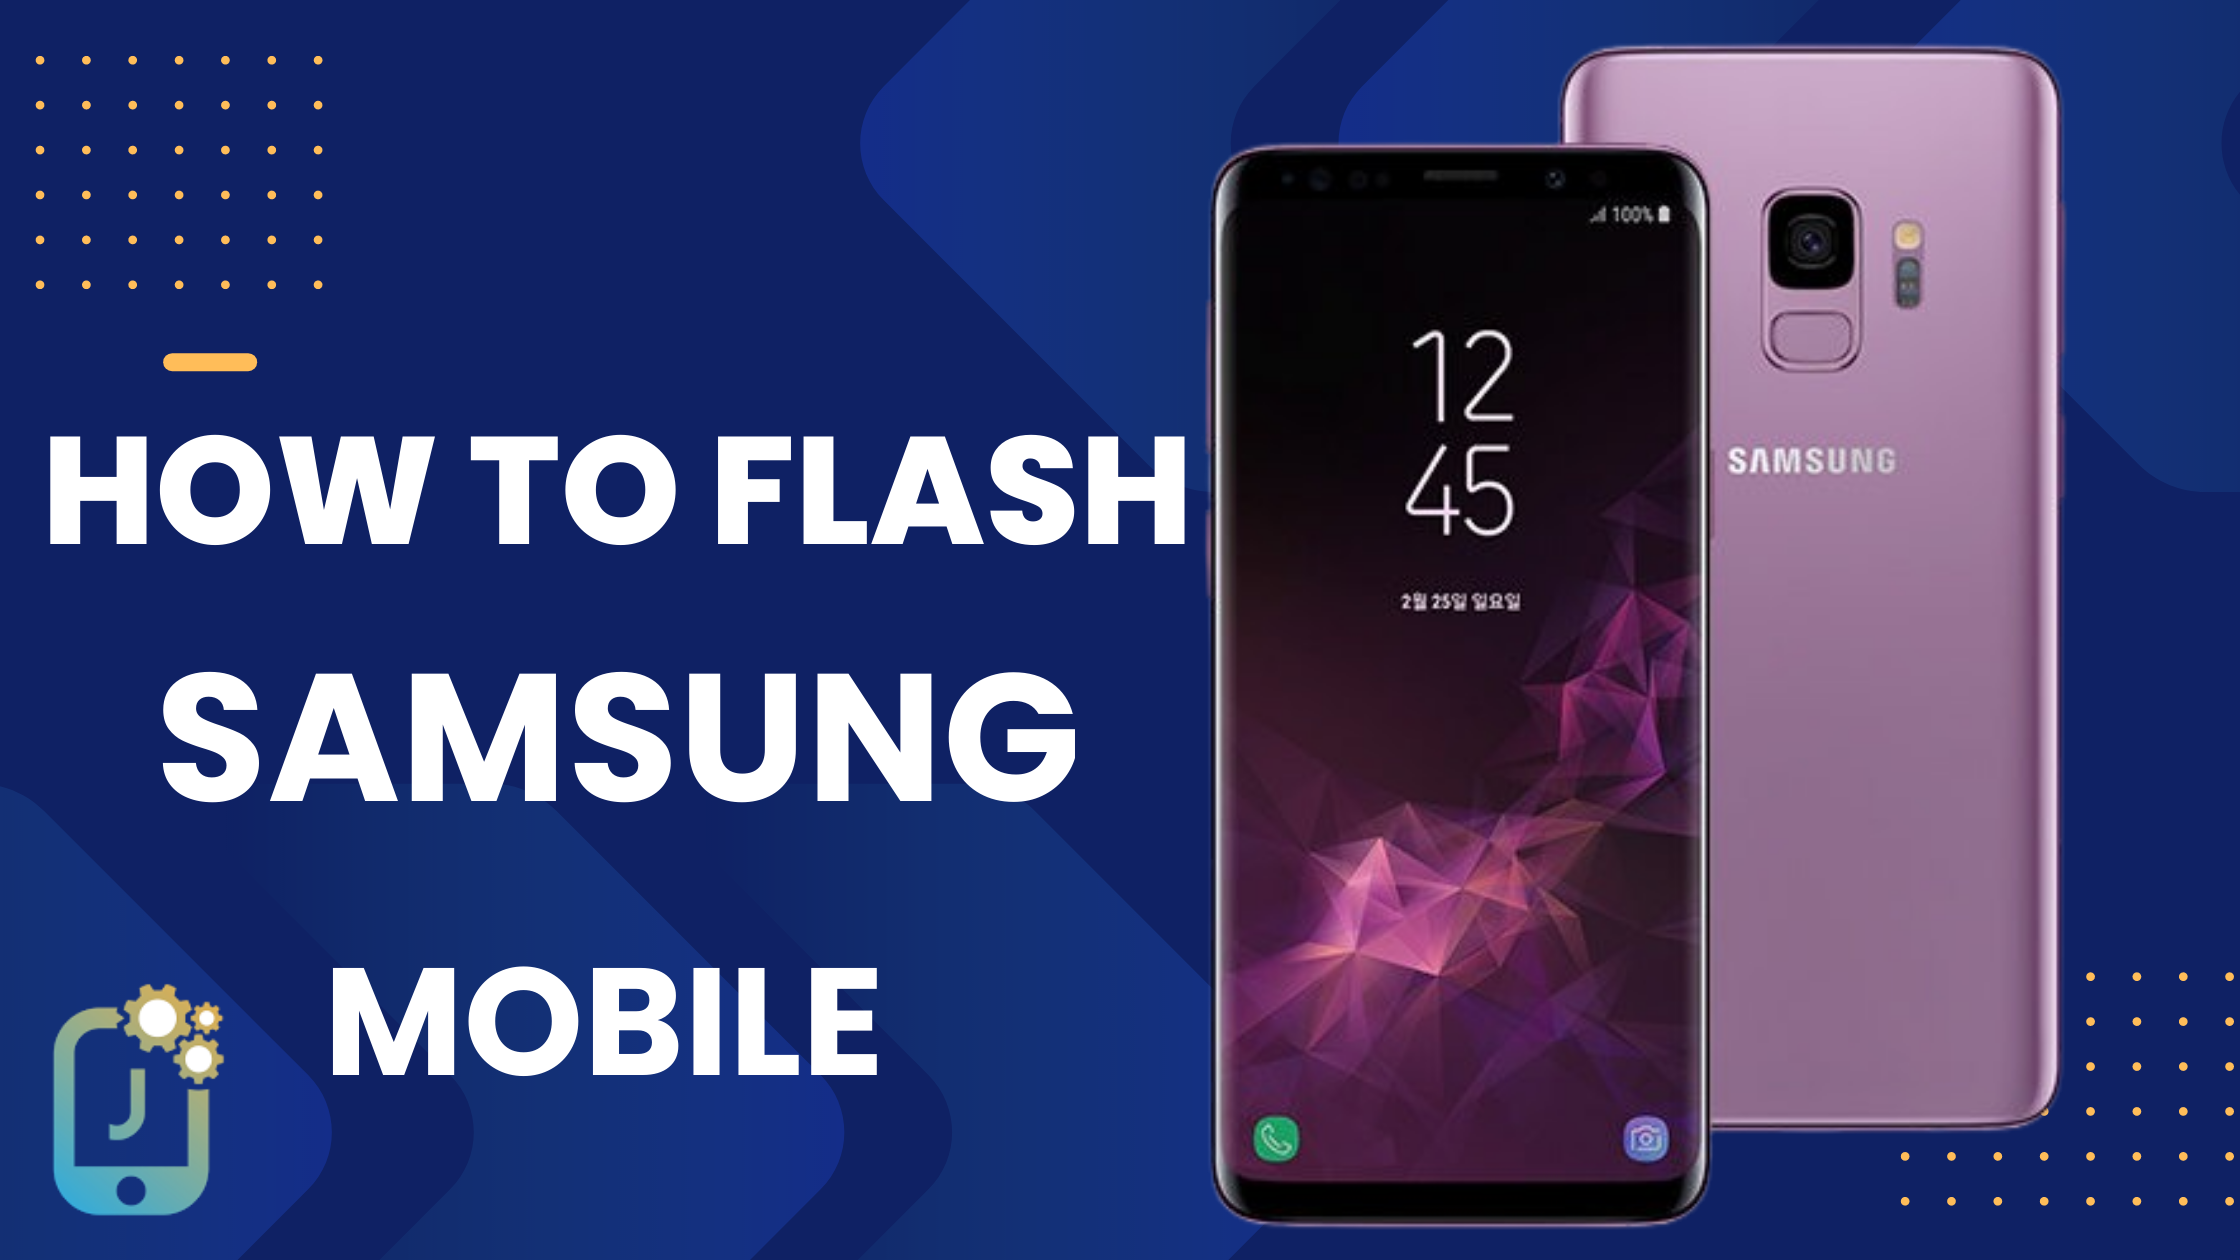 How To Flash Samsung Mobile with the Free Tool | No 1 Tool for Samsung flashing